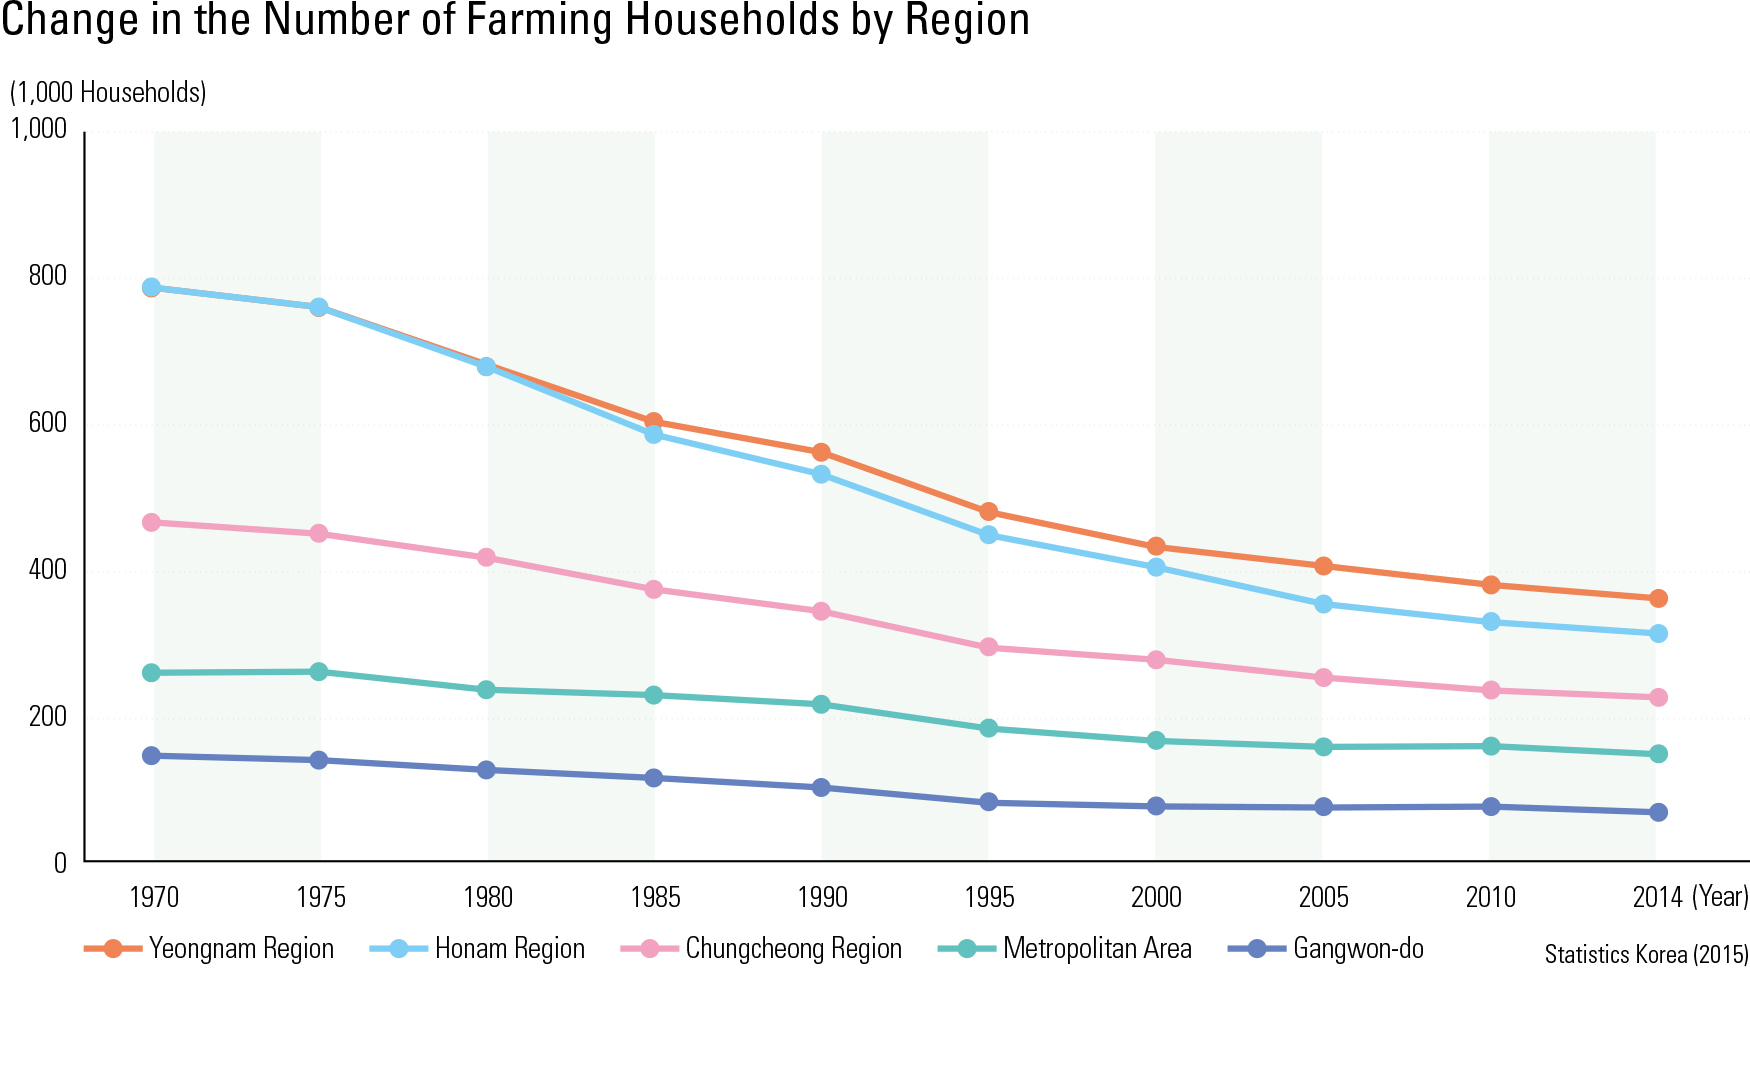 Change in the Number of Farming Households by Region<p class="oz_zoom" zimg="http://imagedata.cafe24.com/us_2/us2_66-2_2.jpg"><span style="font-family:Nanum Myeongjo;"><span style="font-size:18px;"><span class="label label-danger">UPDATE DATA</span></span></p>